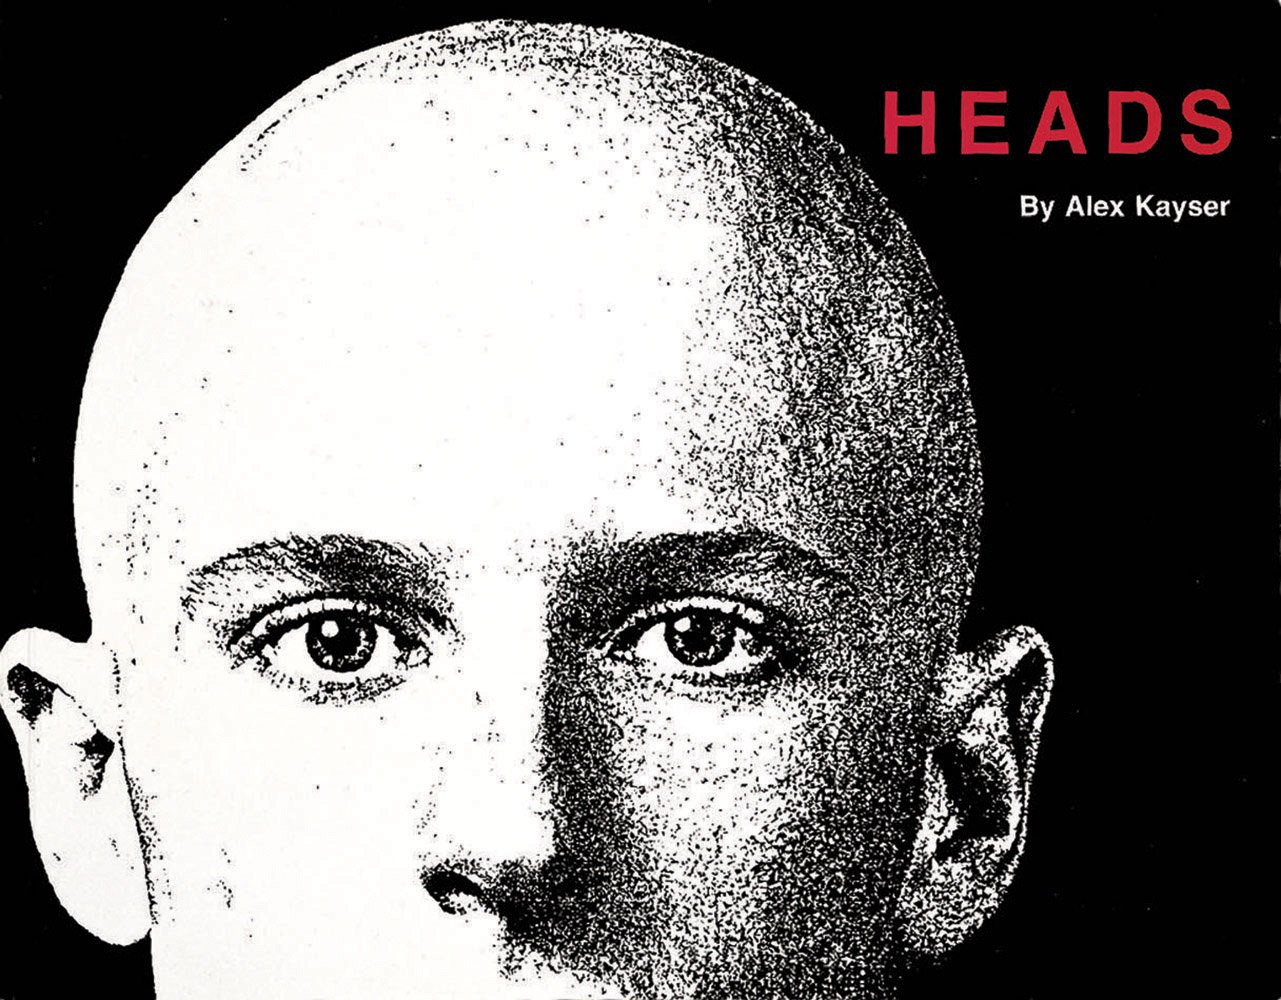 Close up portrait of young bald male, on black cover, HEADS by Alex Kayser in red, and white font to top right.